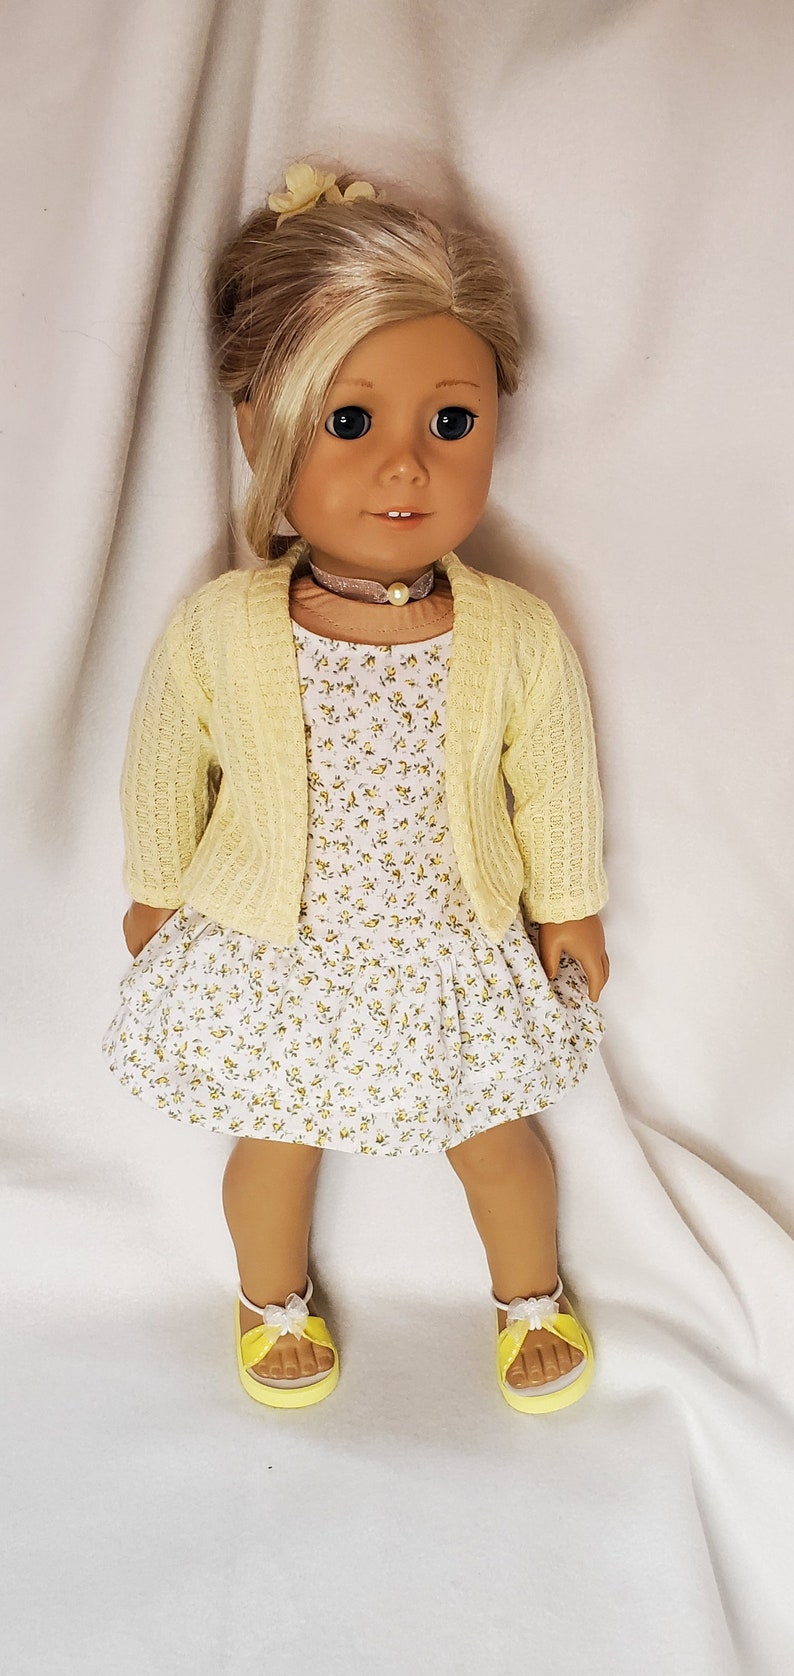 Handmade 18 Doll Clothes, Doll Clothes Fits Popular 18 inch Dolls Spring into Yellow Rosebuds outfit Dress, Cardigan, Sandals, Necklace image 10